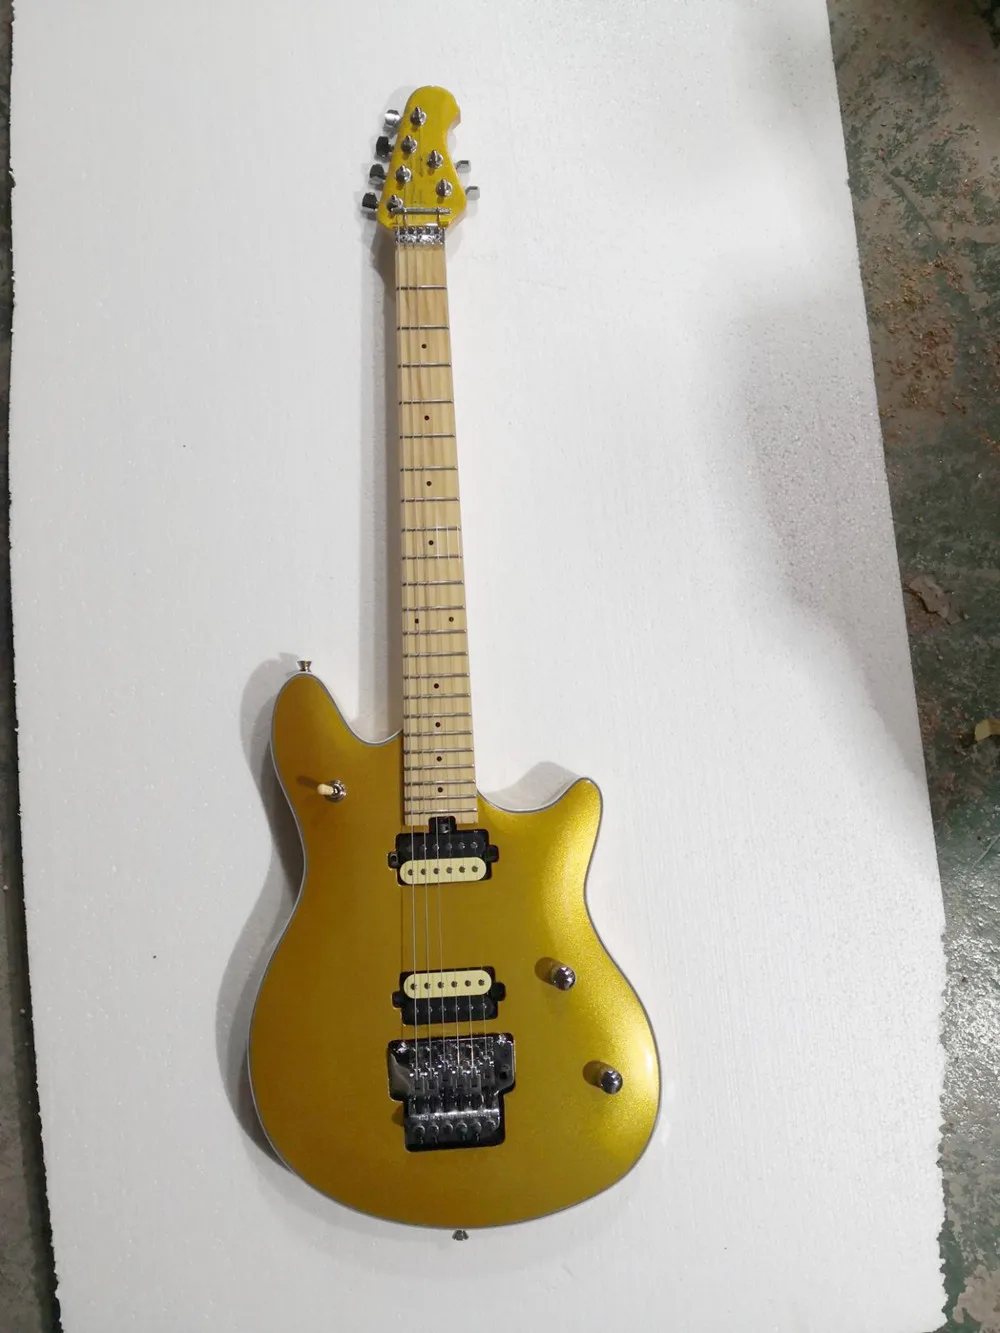 

Gold Body 6 Strings Electric Guitar with Chrome Hardware, Maple Neck,Provide Customized Services